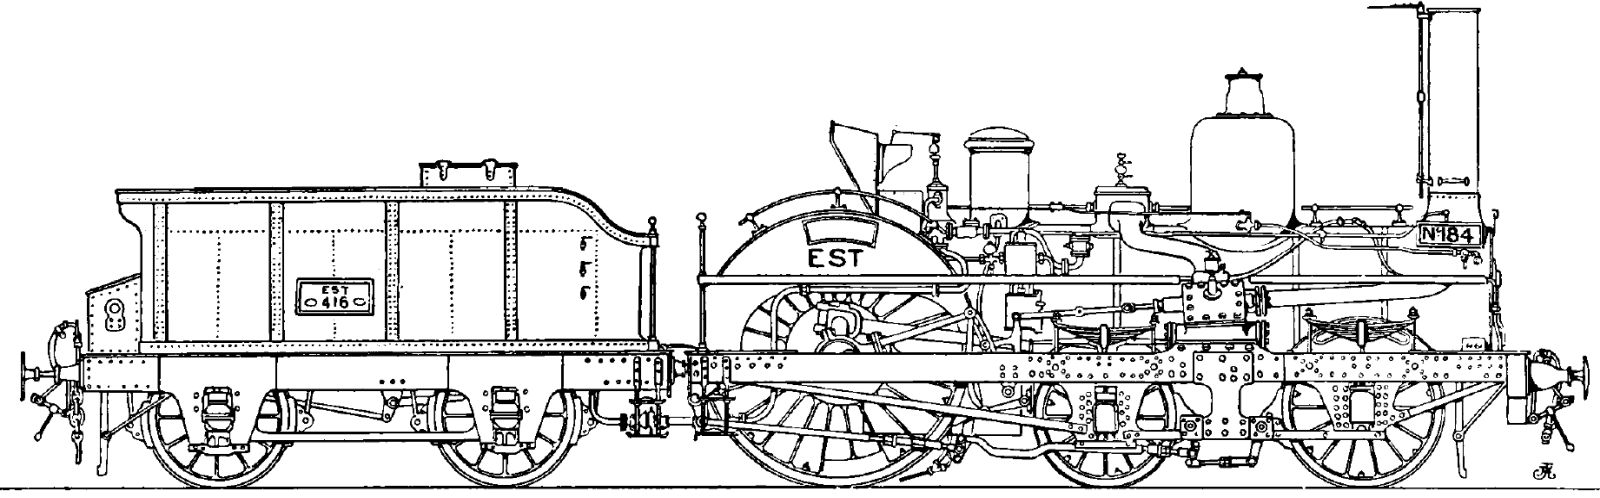 No. 184 rebuilt with heavier driving wheels